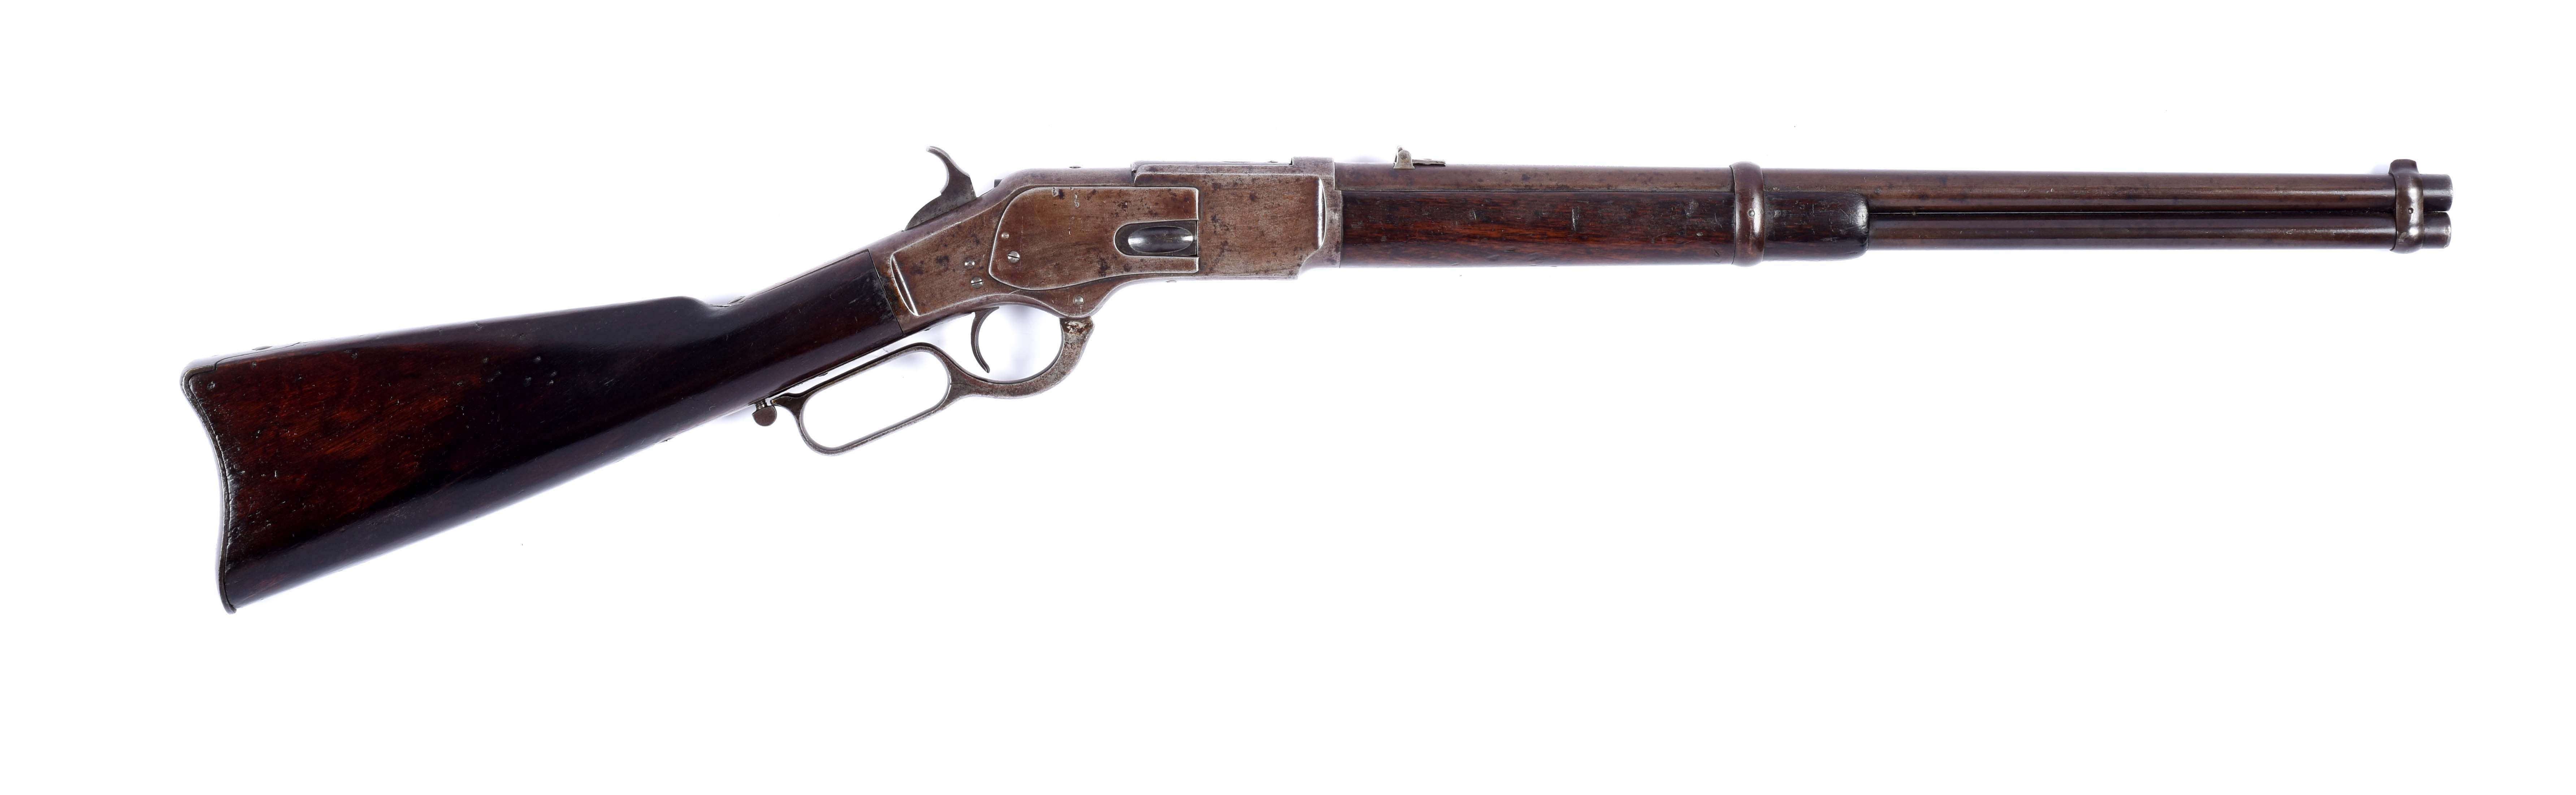 He-Dog Oglala Sioux First Model Winchester Model 1873 First Model Saddle Ring Carbine, estimated at $15,000-20,000.